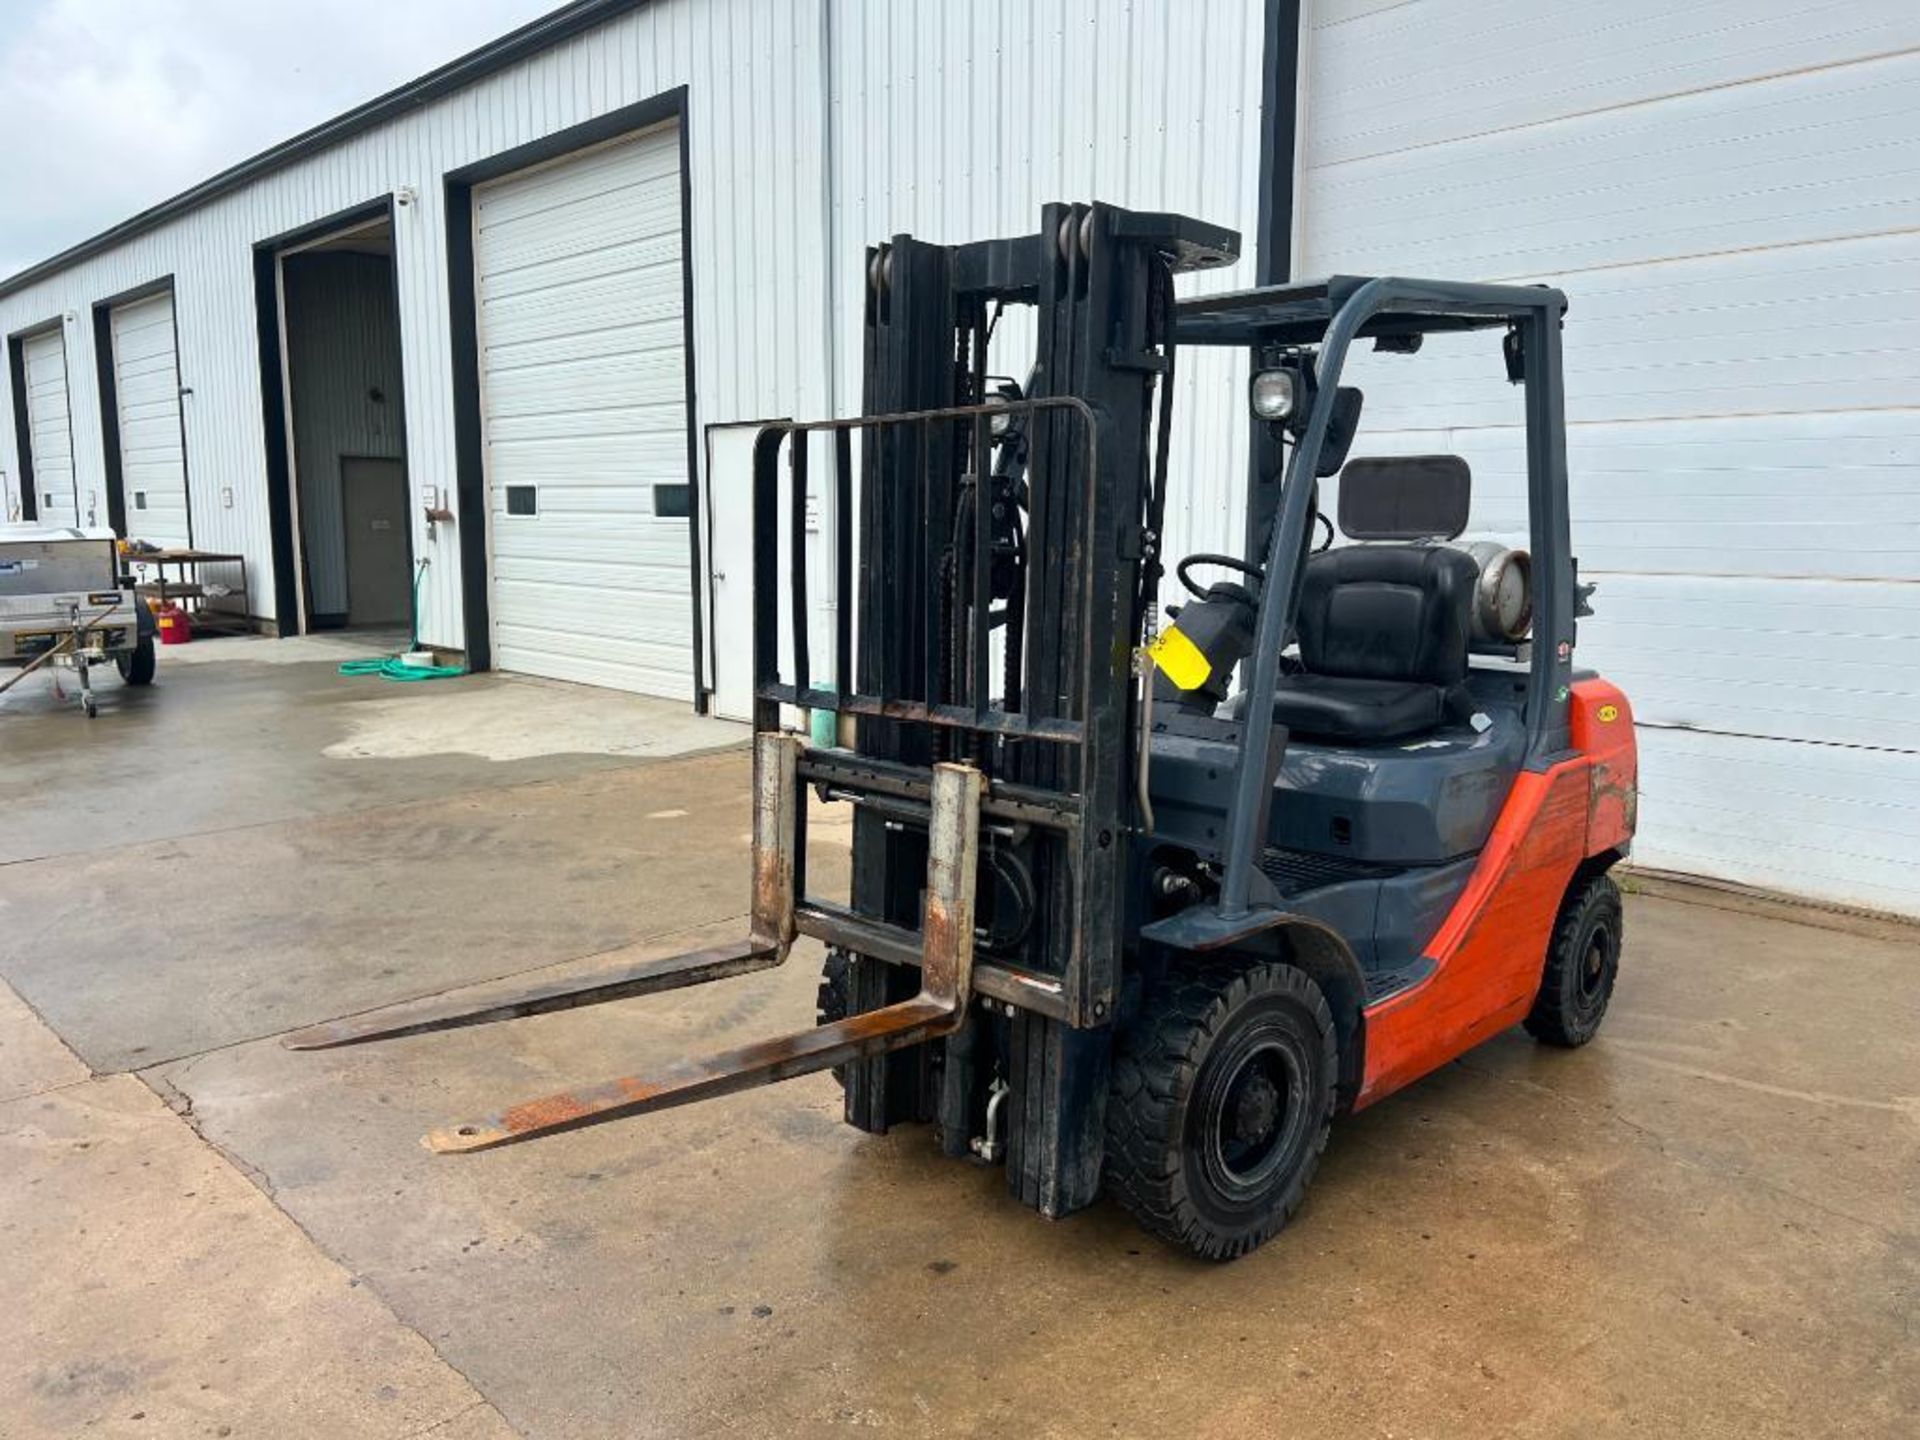 Toyota Forklift Truck, Model 8FGU25, Hours 5,264, LP. Located in Altamont, IL - Image 4 of 19